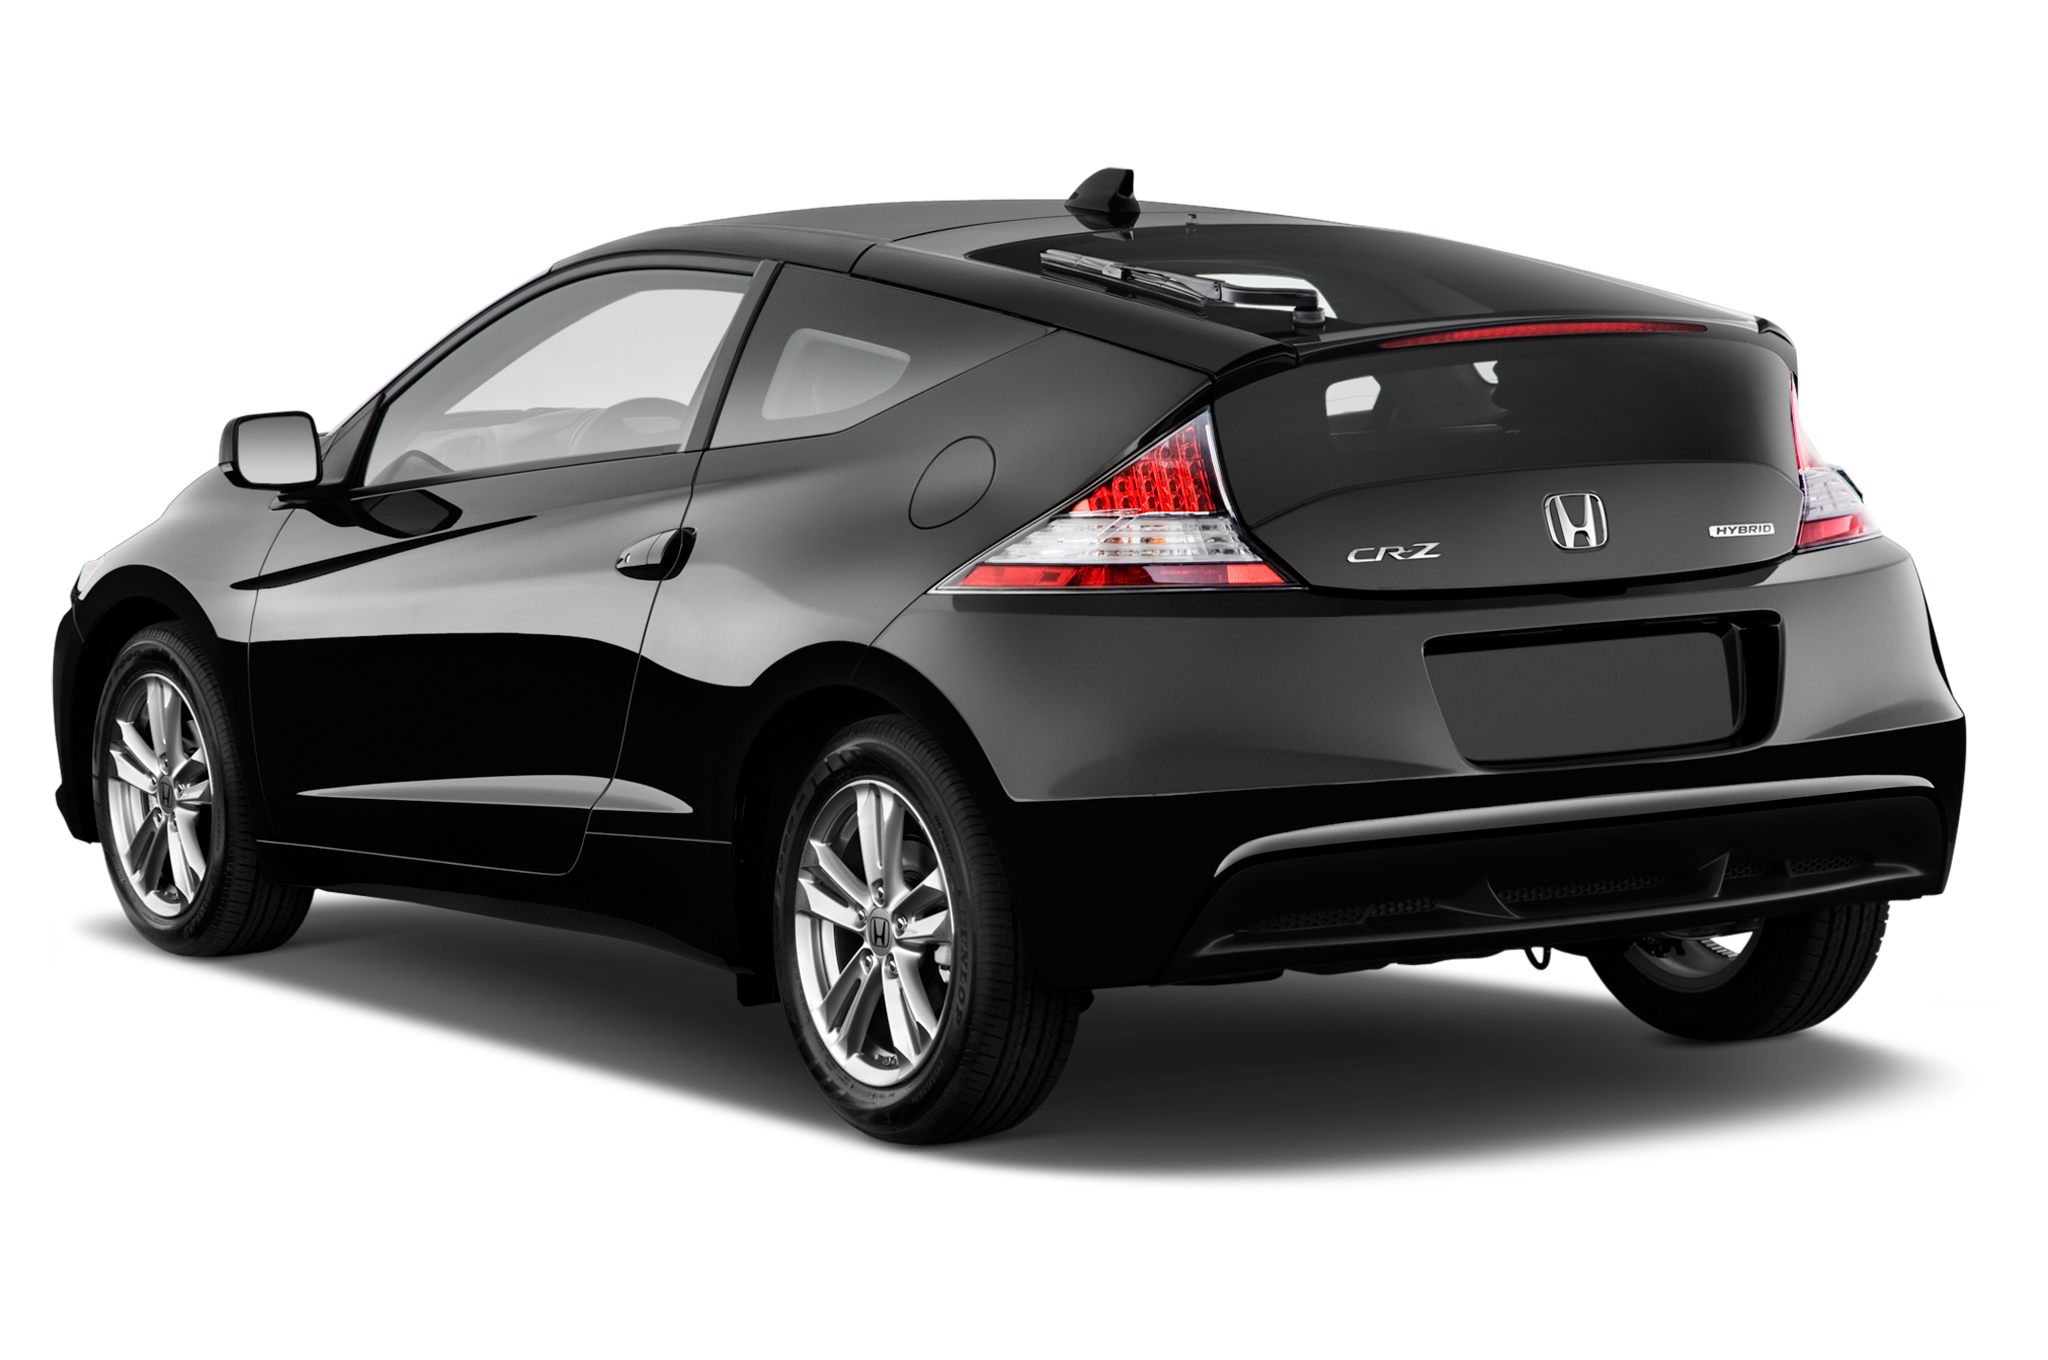 Honda CR-Z Sports Hybrid Base Grade Solid Color 2021 Prices in Pakistan Pkr Specs Reviews and Pictures